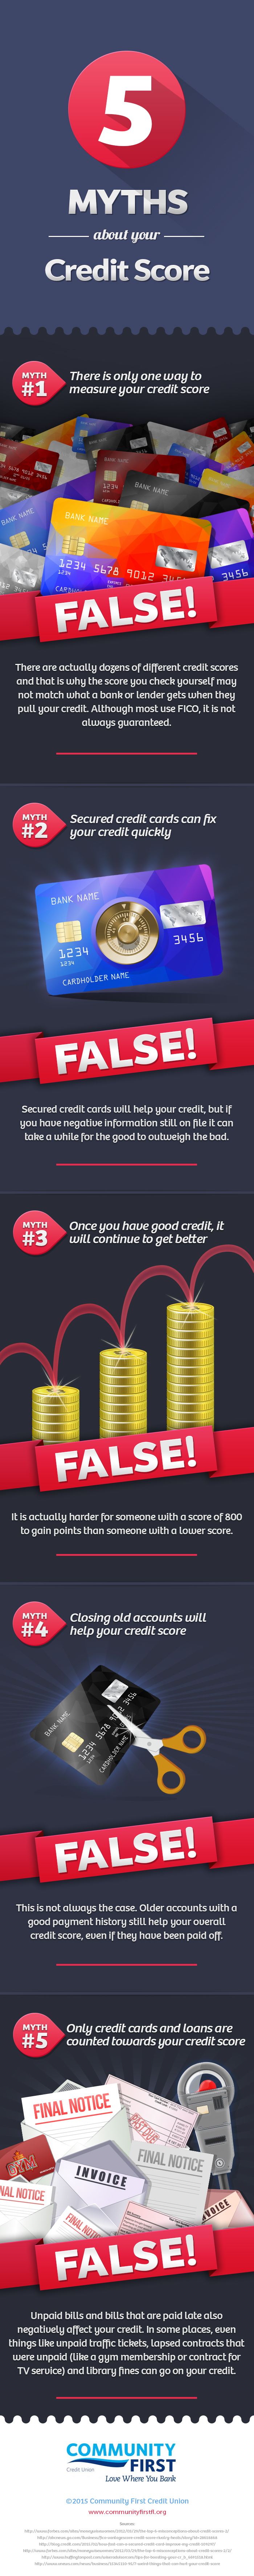 5 Myths About Your Credit Score